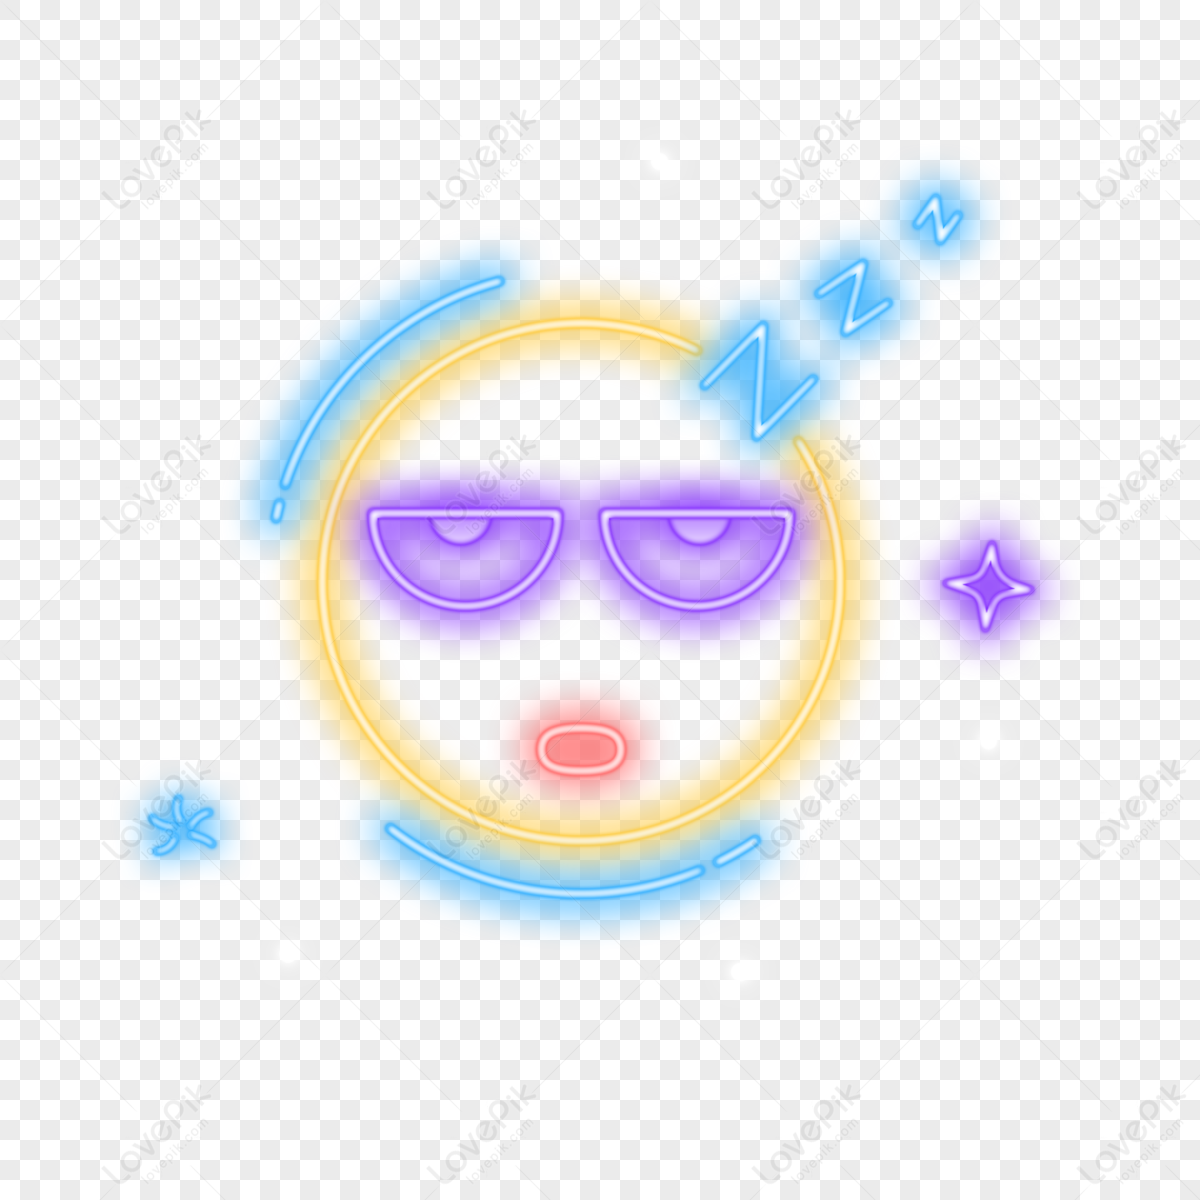 Free Expectorate Emoji Icon - Download in Line Style